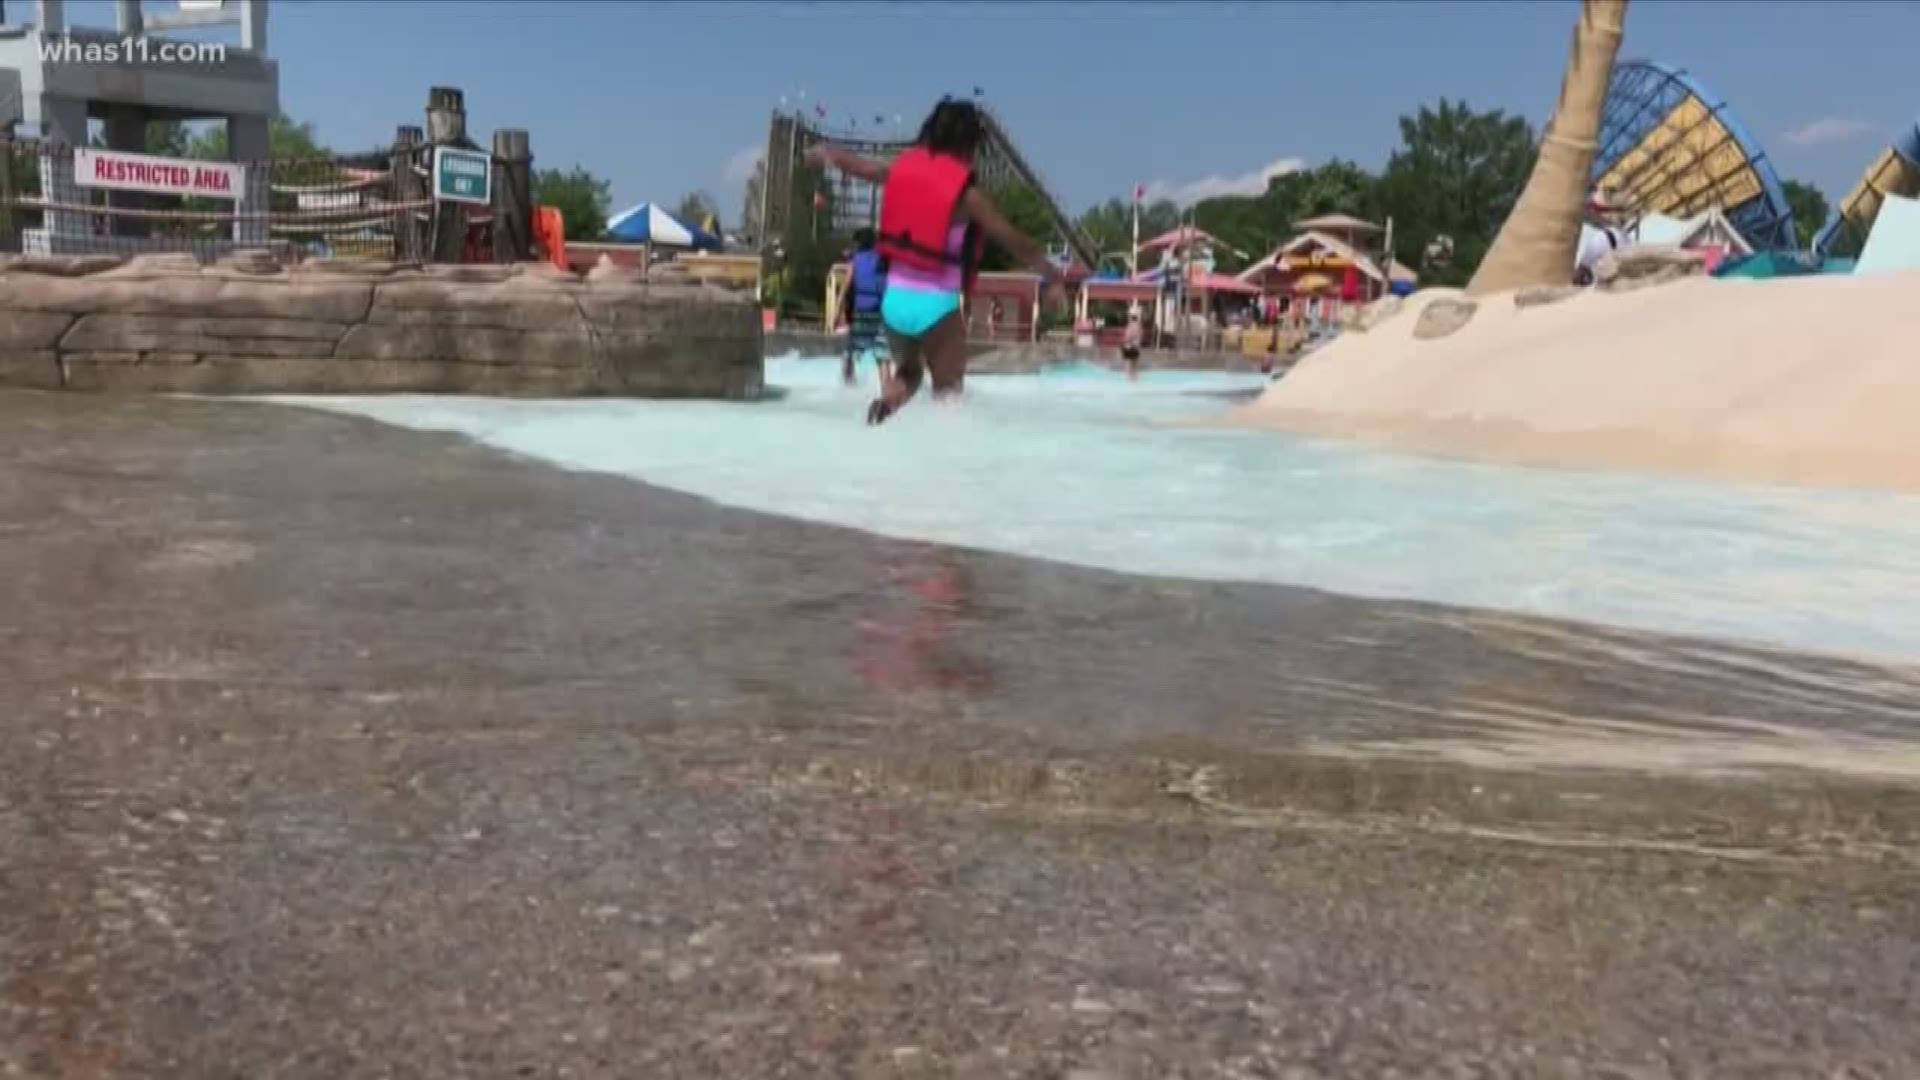 As hot weather made its way into Kentuckiana, the cool waters of Hurricane Bay at Kentucky Kingdom opened for the season.